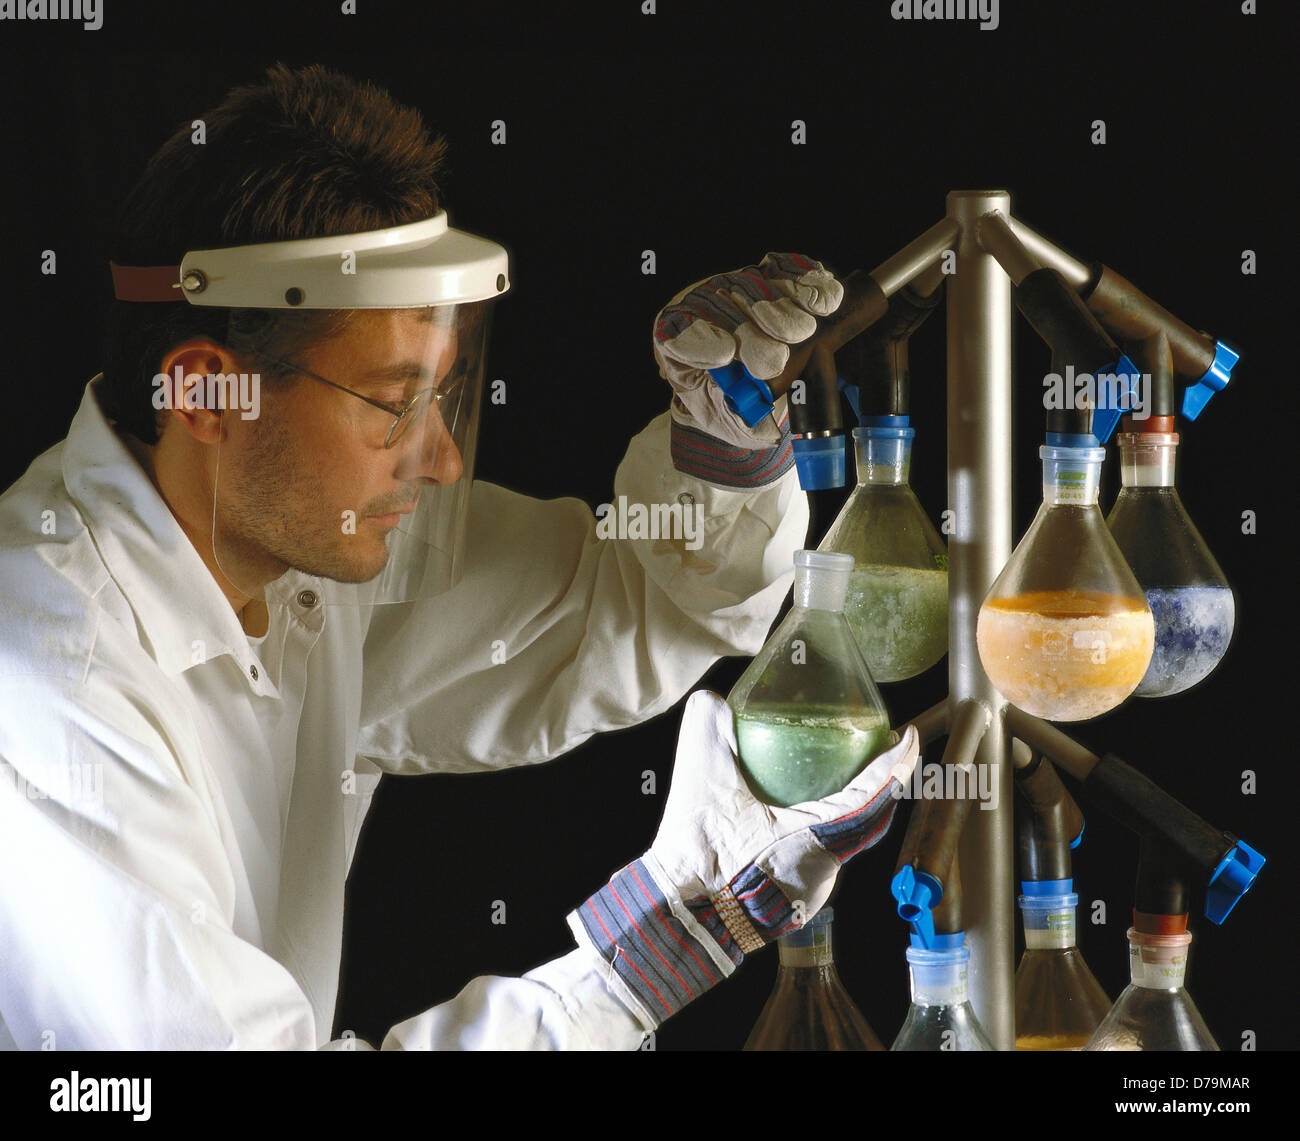 Researcher handling flasks containing freeze-dried active substances found in mushrooms bacteria Stock Photo